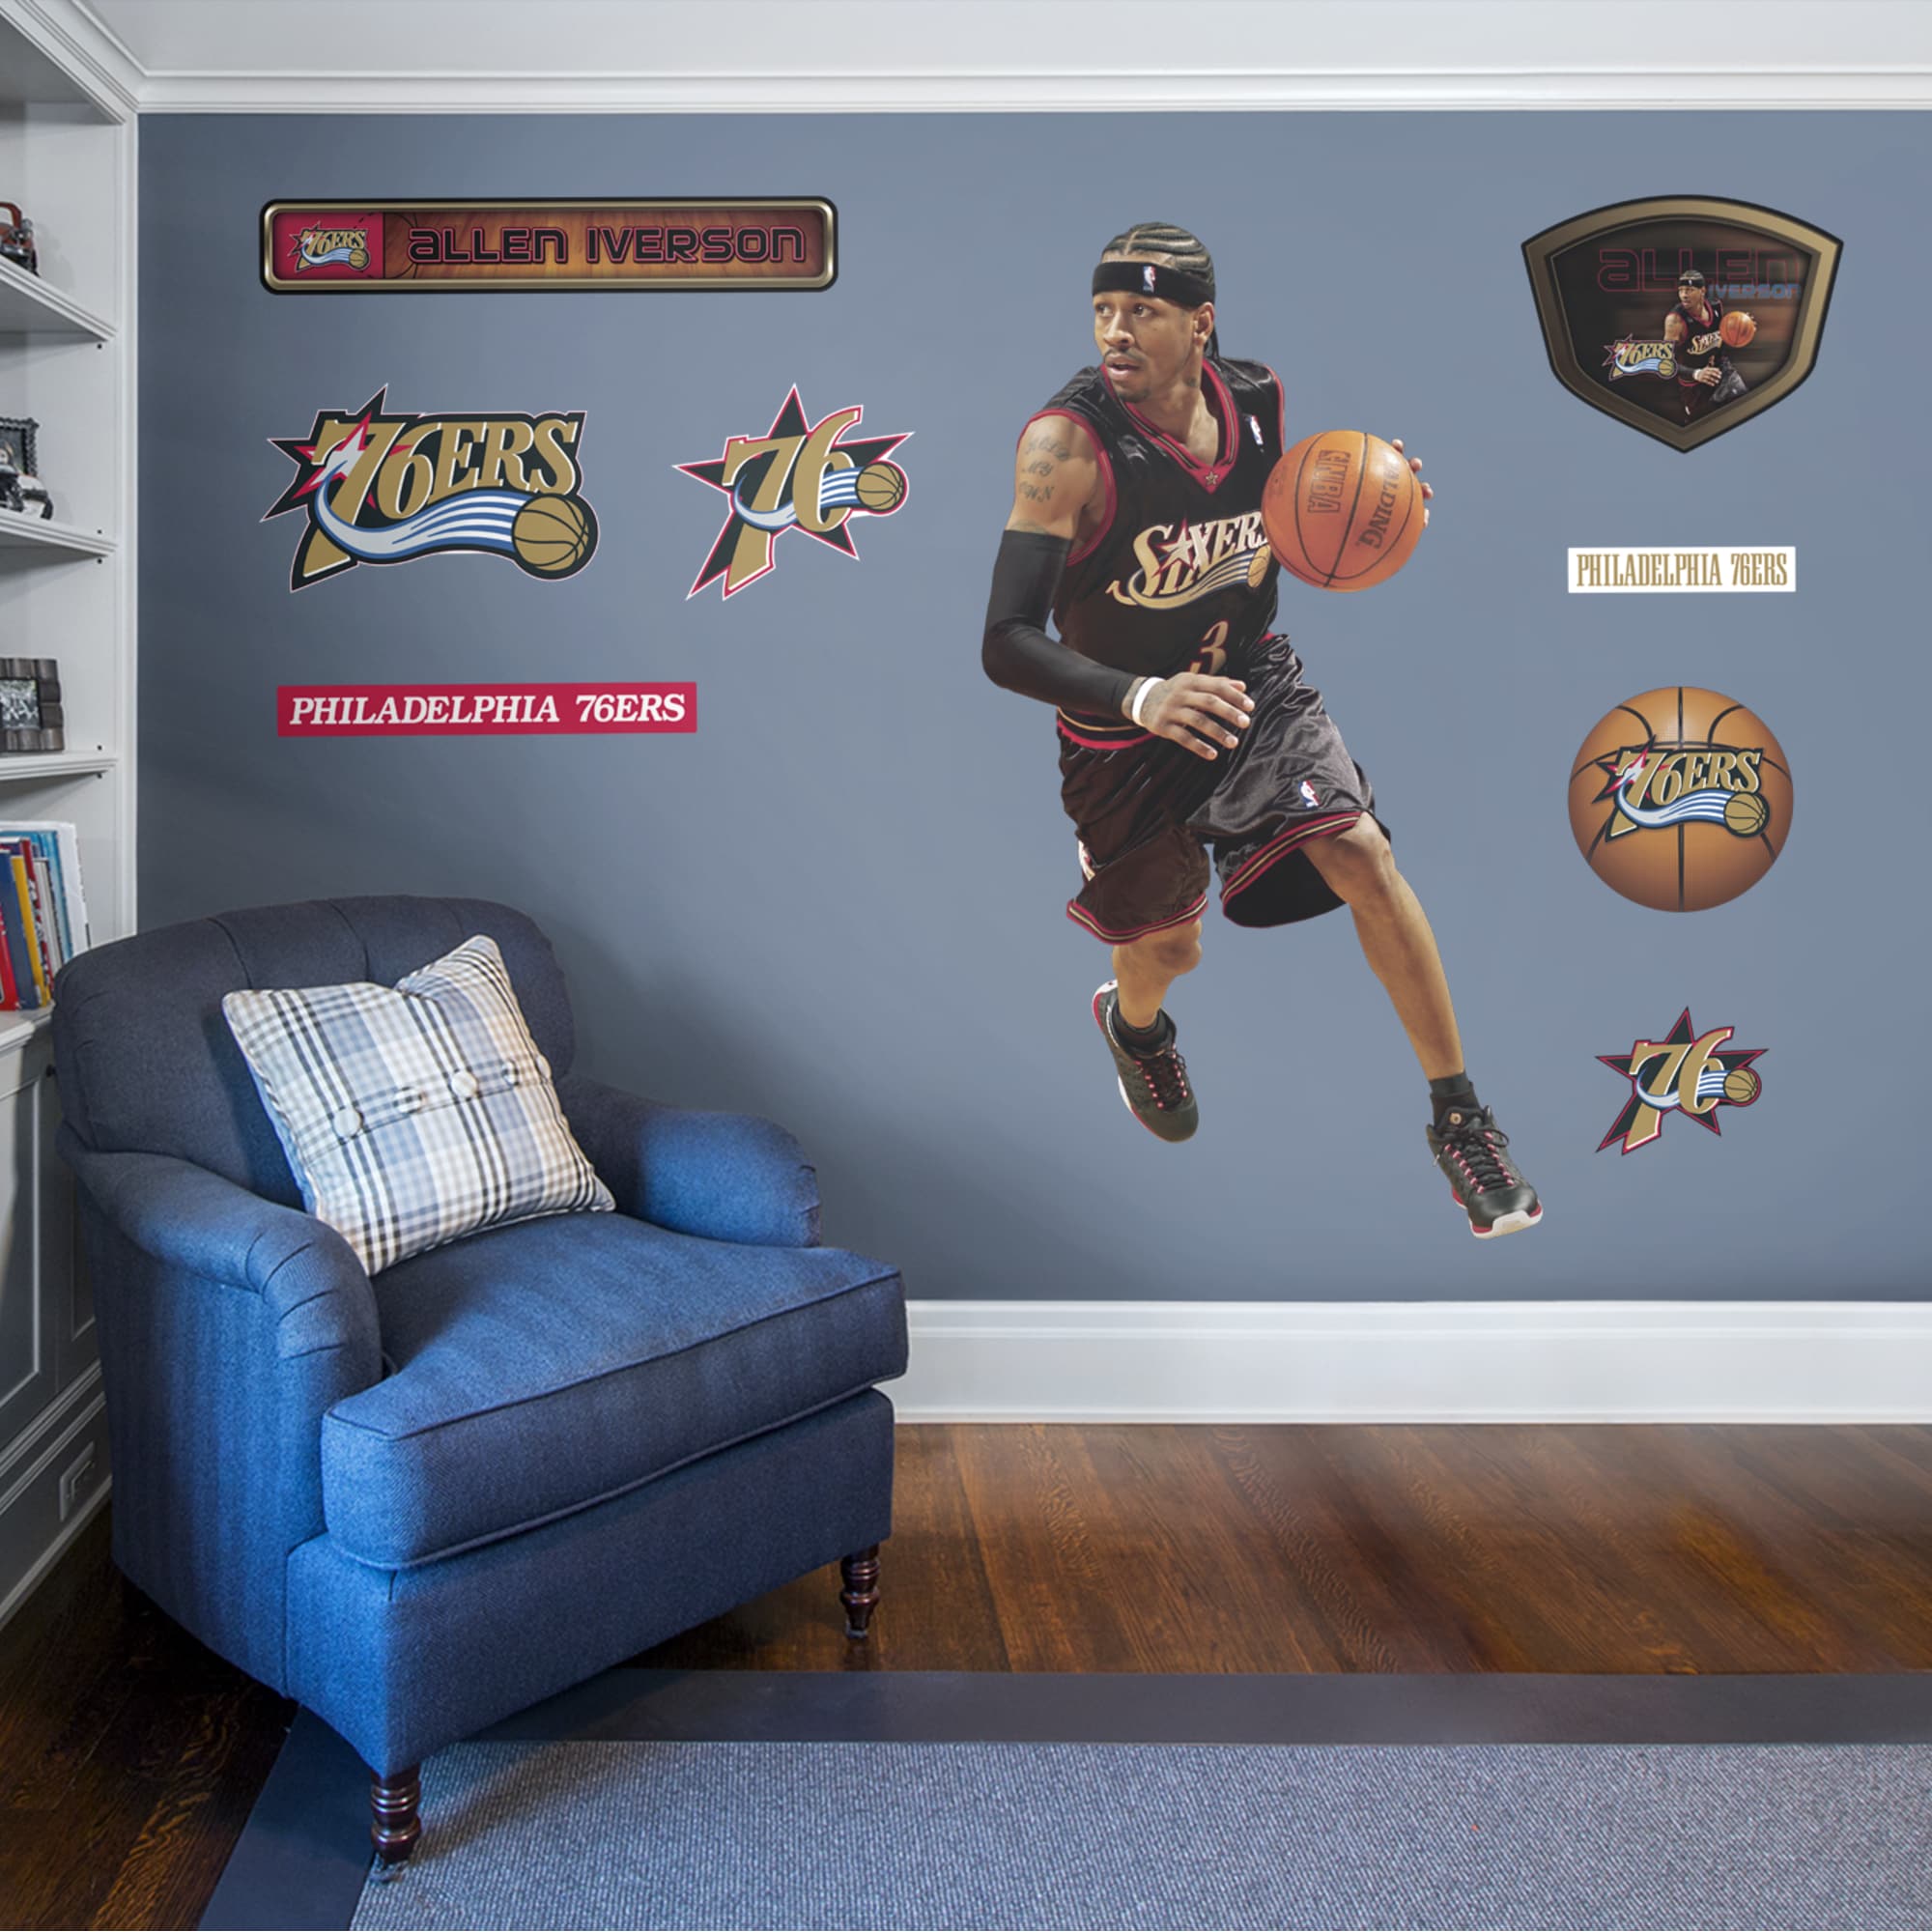 Allen Iverson for Philadelphia 76ers: Legend - Officially Licensed NBA Removable Wall Decal Life-Size Athlete + 9 Decals (44"W x